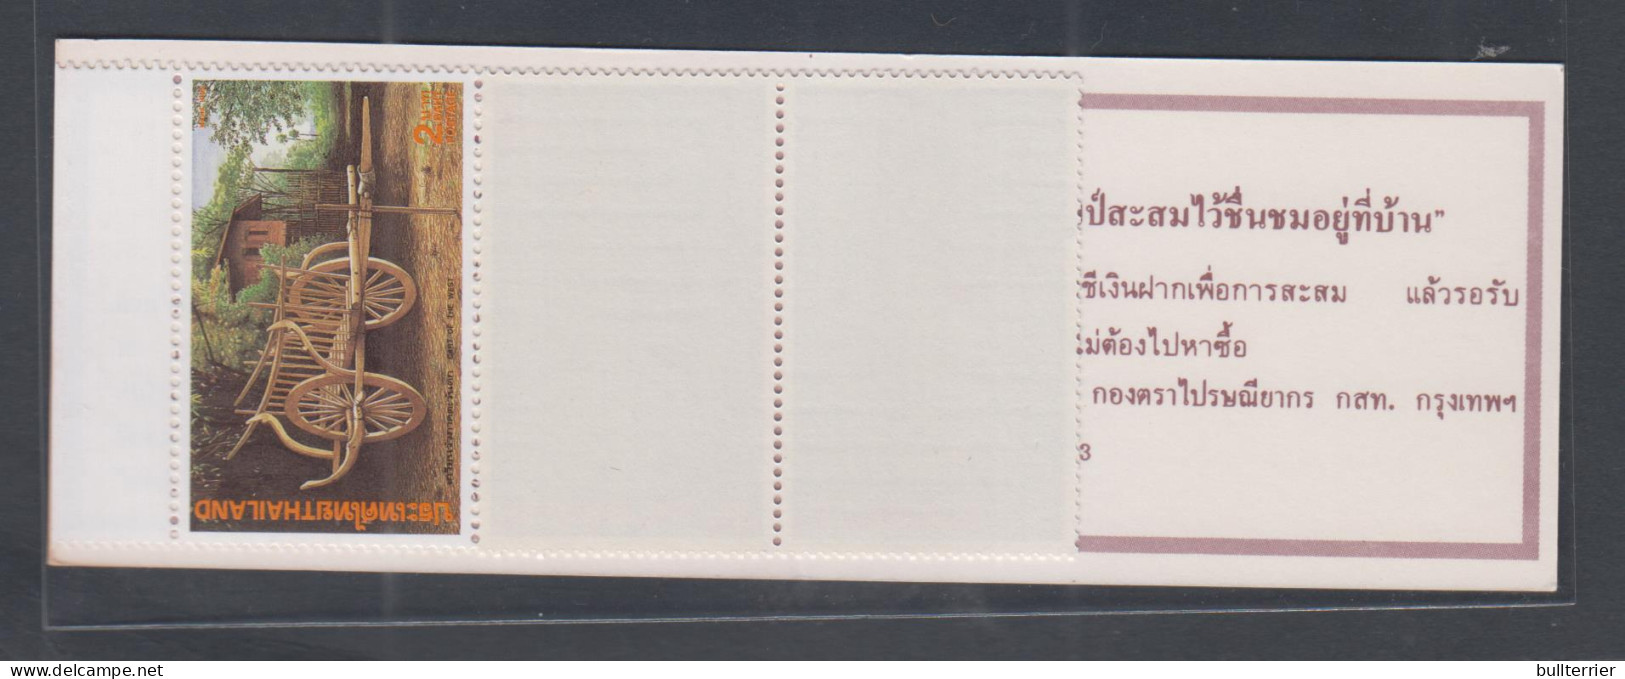 THAILAND - 1992 - TRADITIONAL CARTS  BOOKLET COMPLETE MINT NEVER HINGED  - Thailand